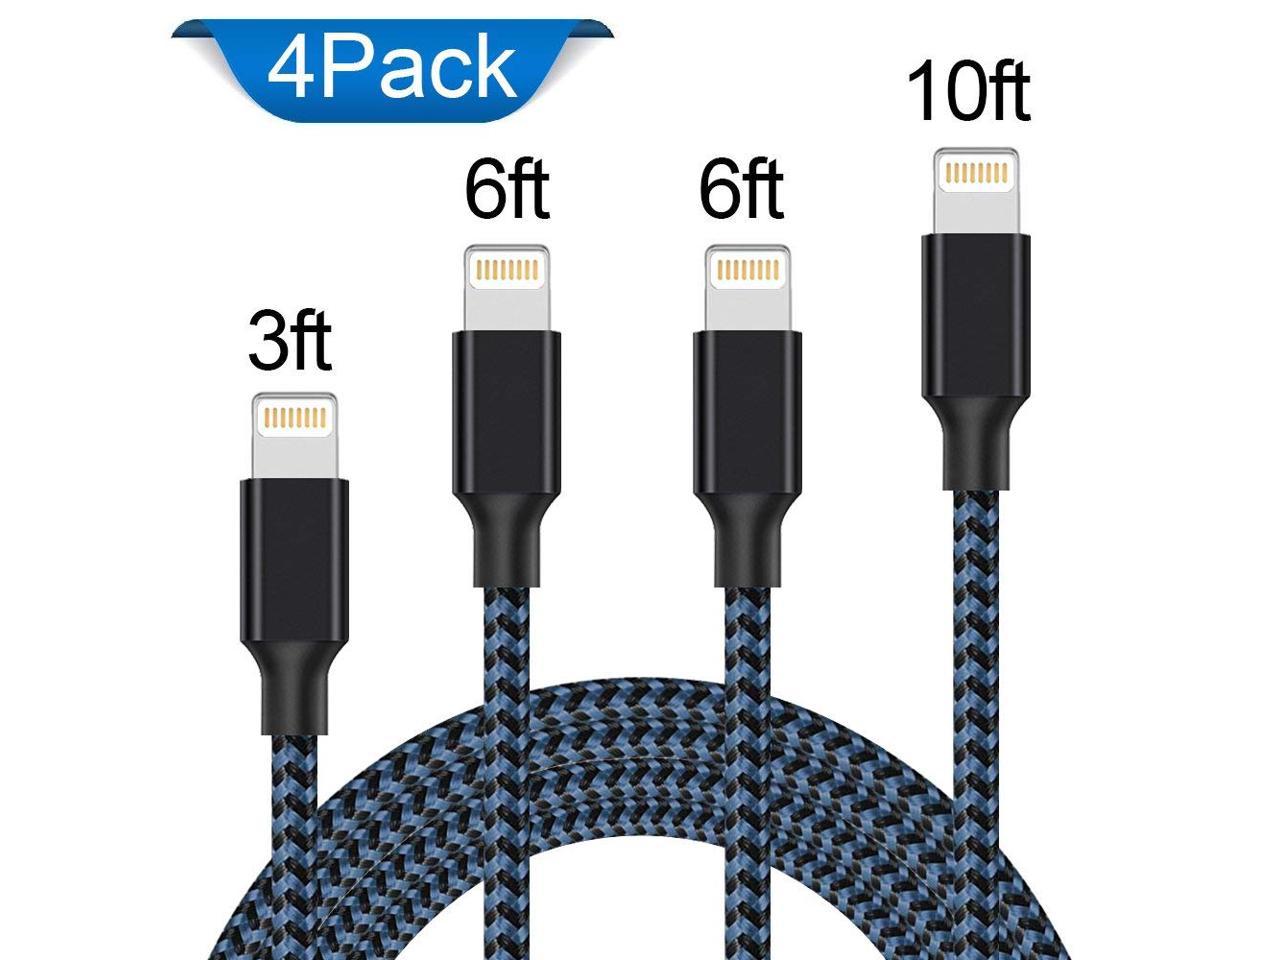 iPod PURIDEA 6Ft iPhone Charger Cable Black 5Pack 6 Feet Lightning Certified Fast Charging Cord Compatible for iPhone X 8 7 6S 6 Plus iPad 2 3 4 Mini iPad Pro Air